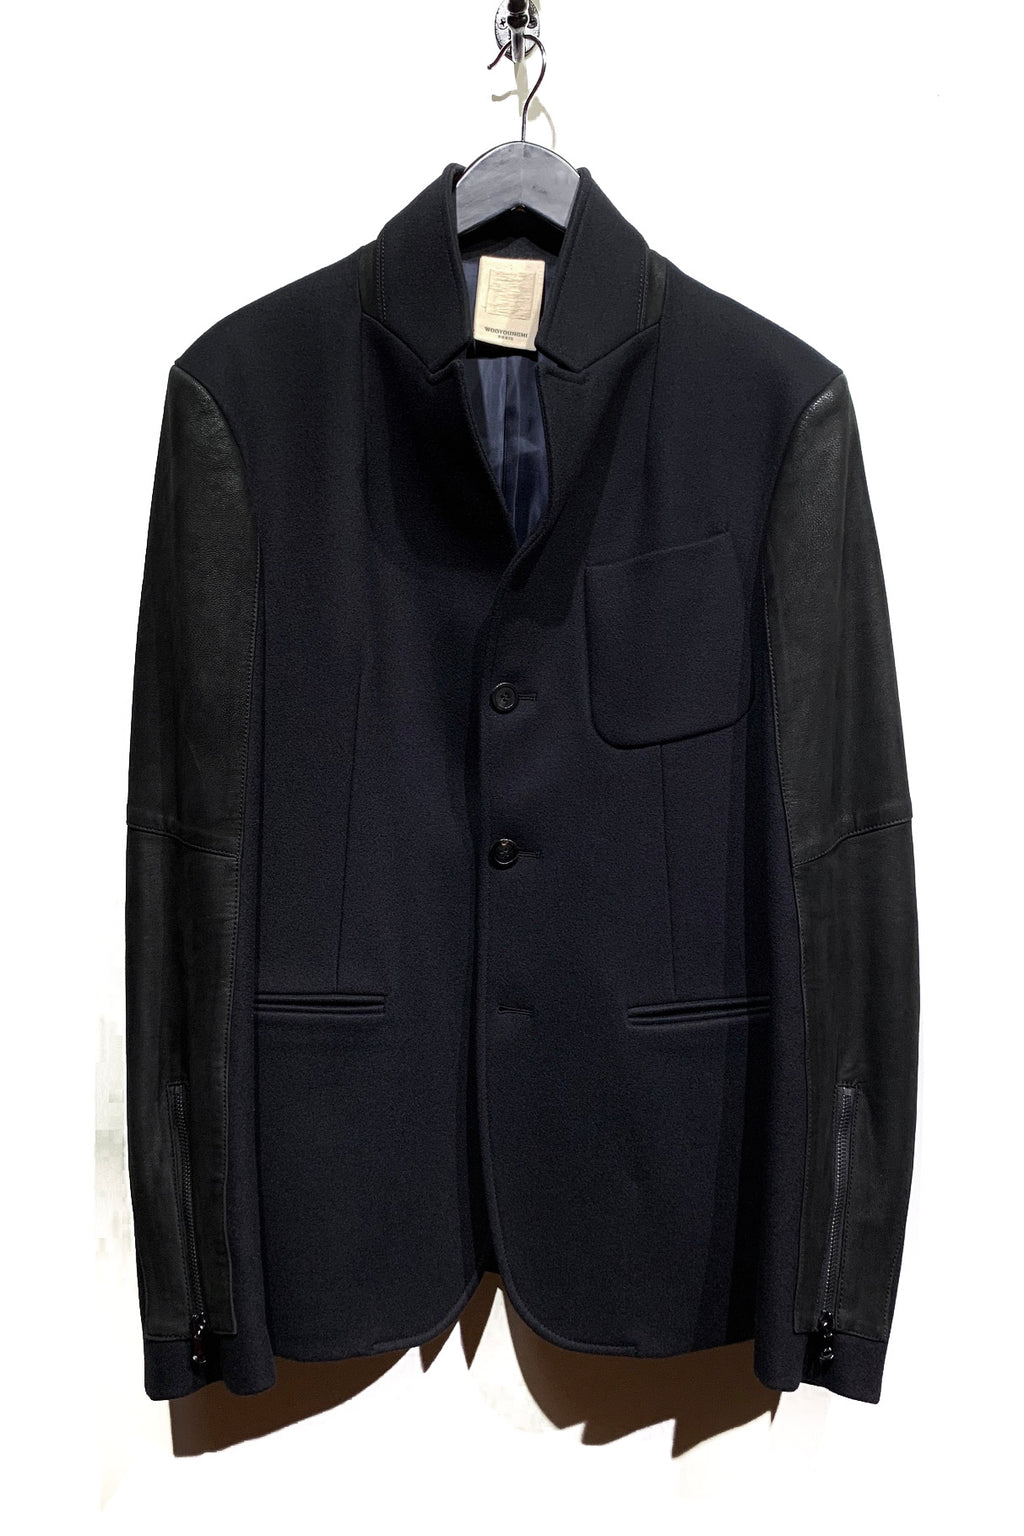 Wooyoungmi Navy Wool Blazer Jacket with Black Leather Sleeves